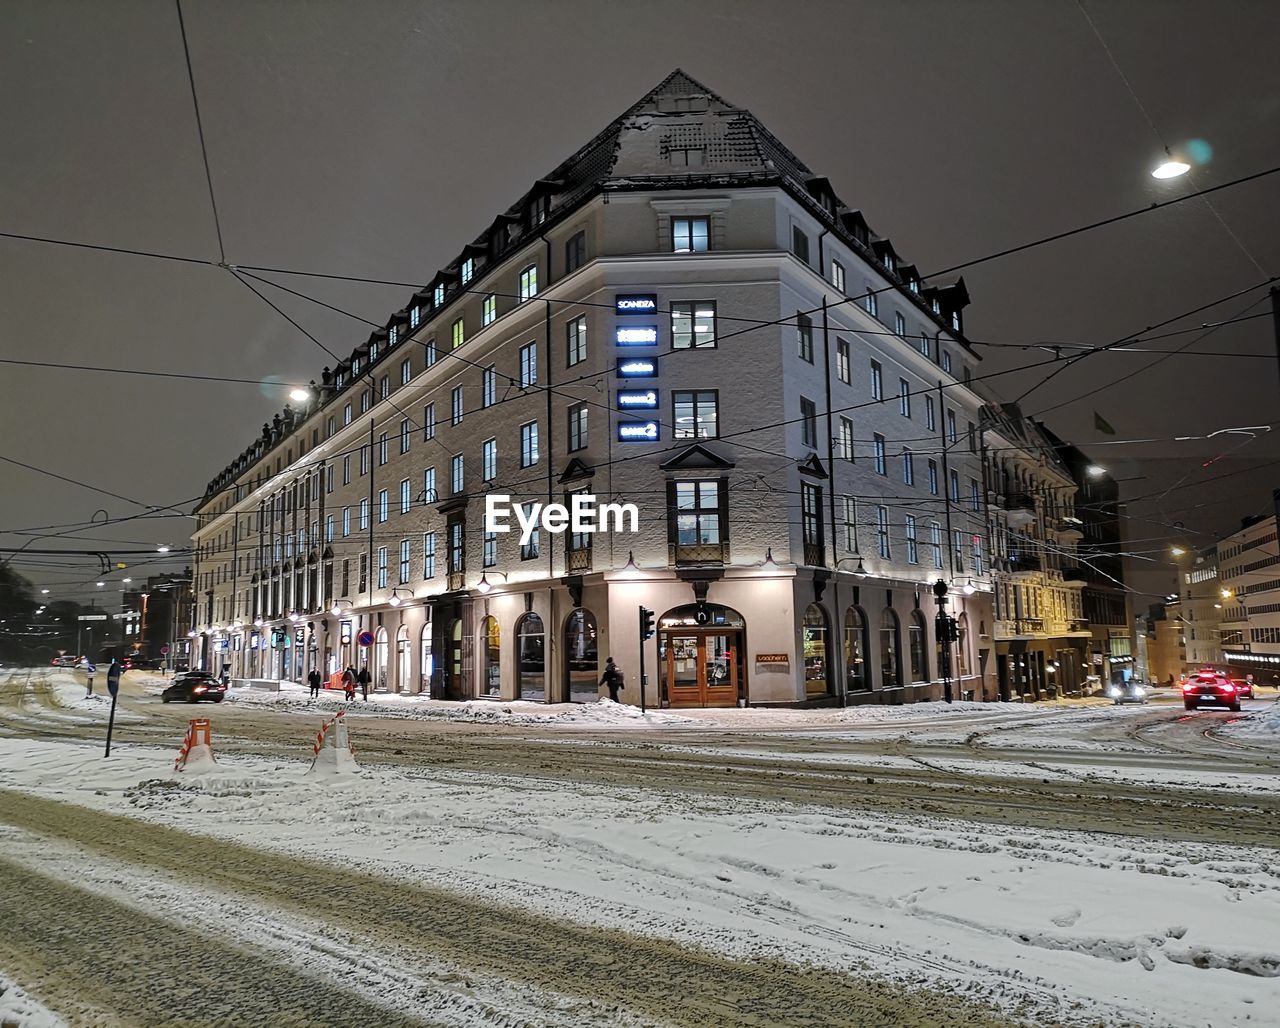 BUILDINGS IN CITY DURING WINTER